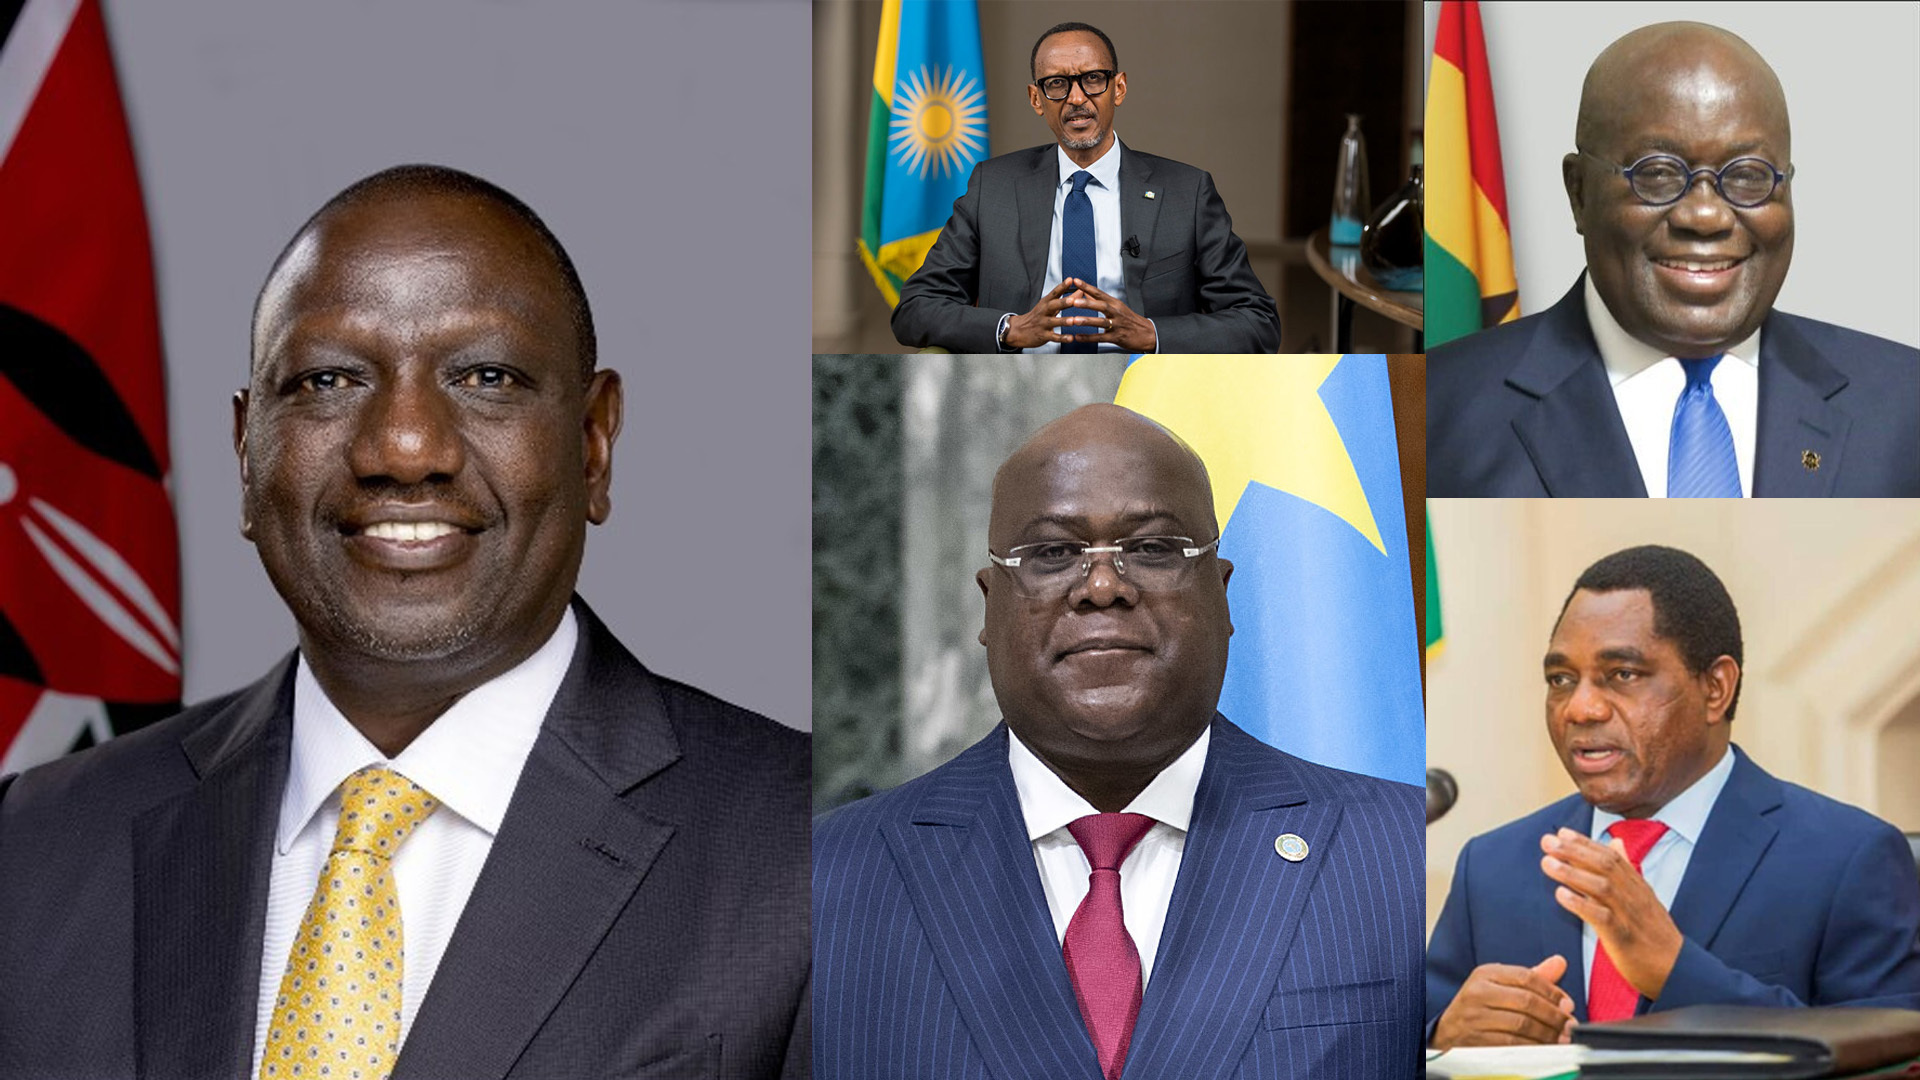 5 most interesting quotes from African leaders on insecurity at the UN general assembly